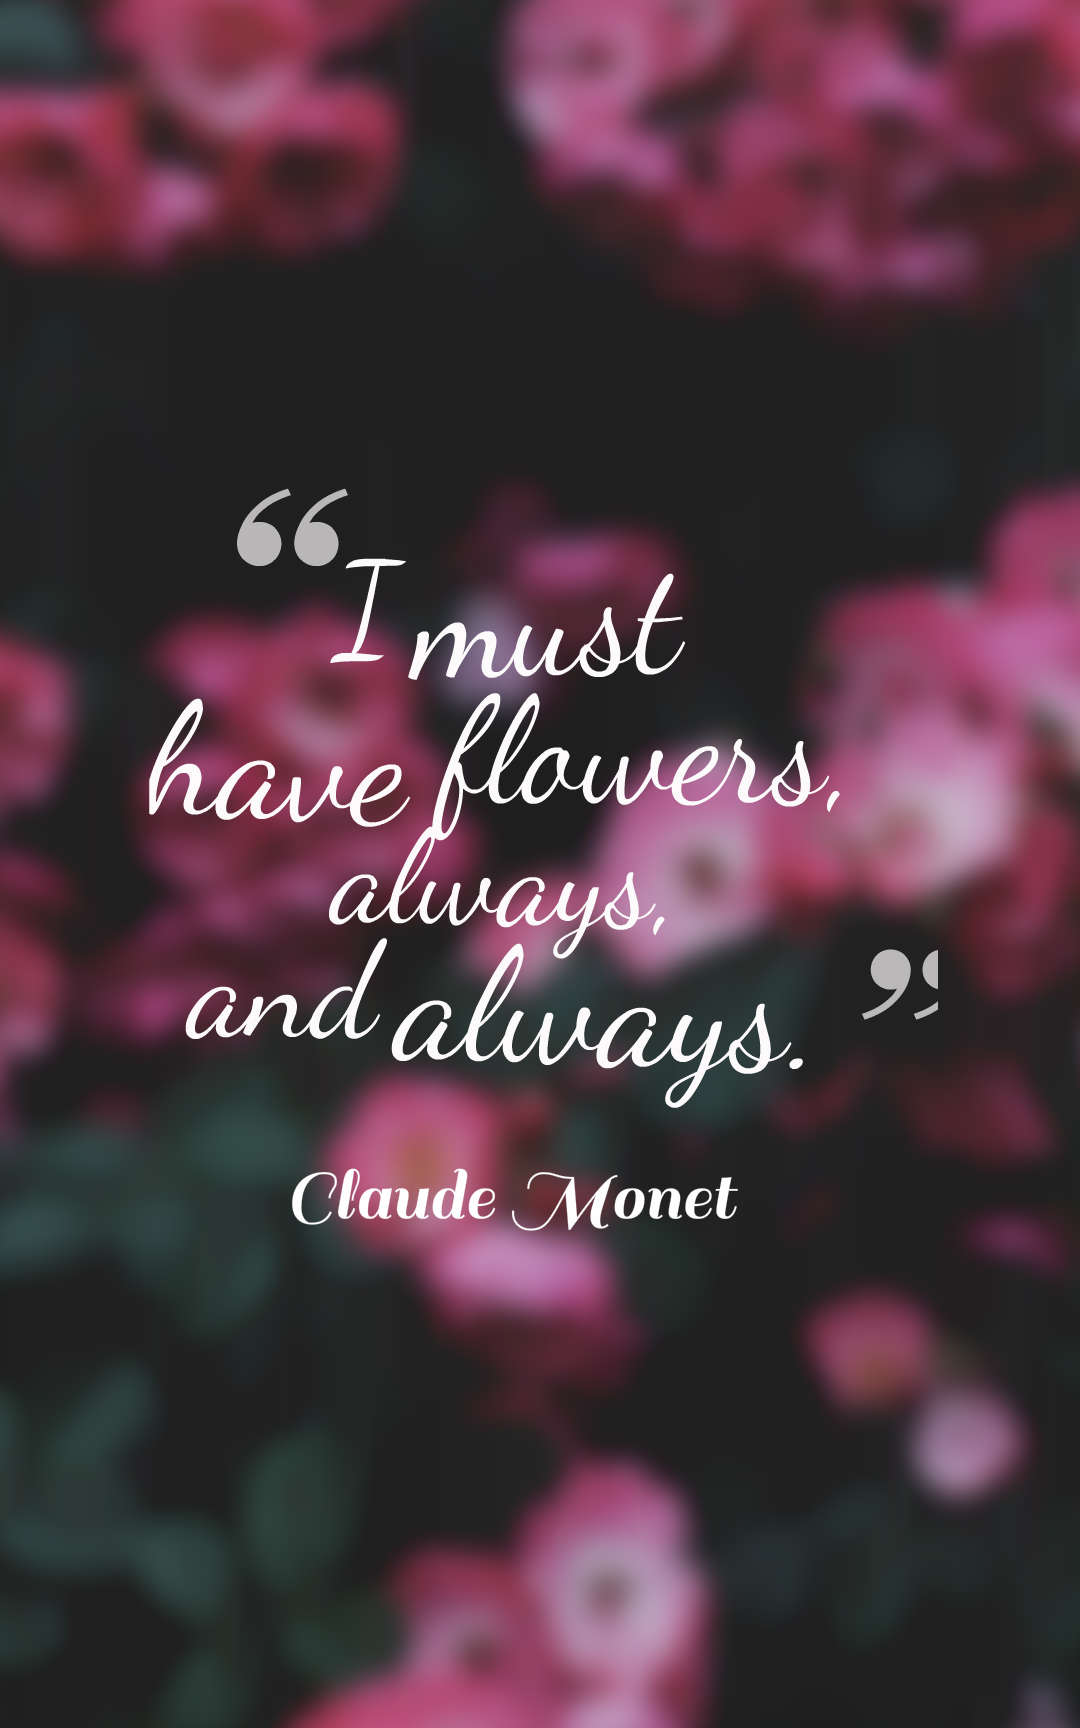 I must have flowers, always, and always.